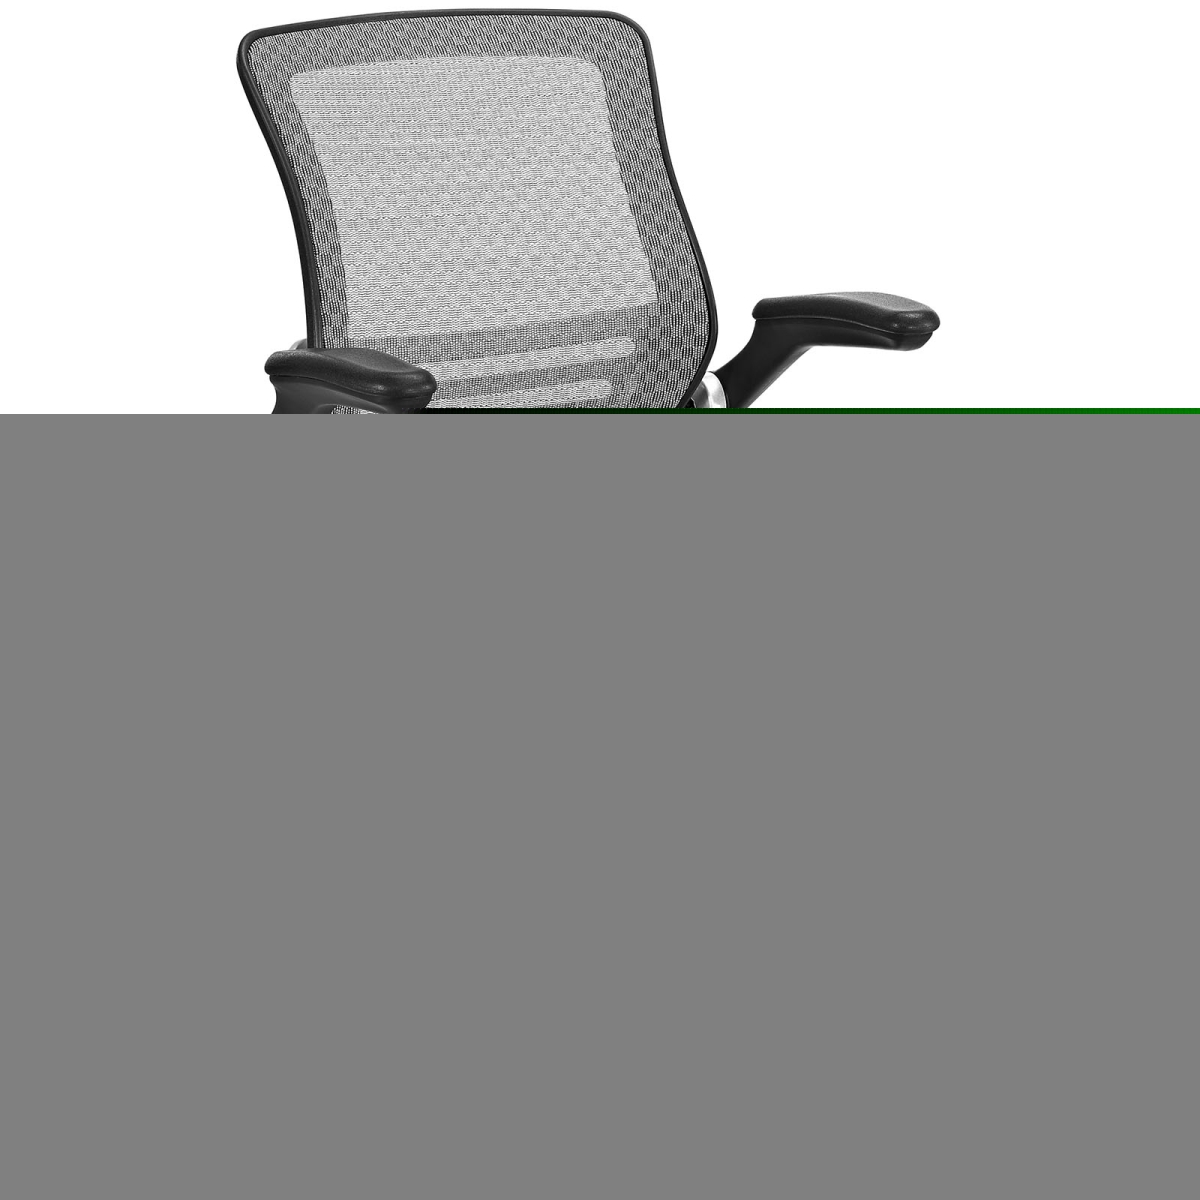 Modway Eei-2064-gry Edge All Mesh Office Chair, Gray